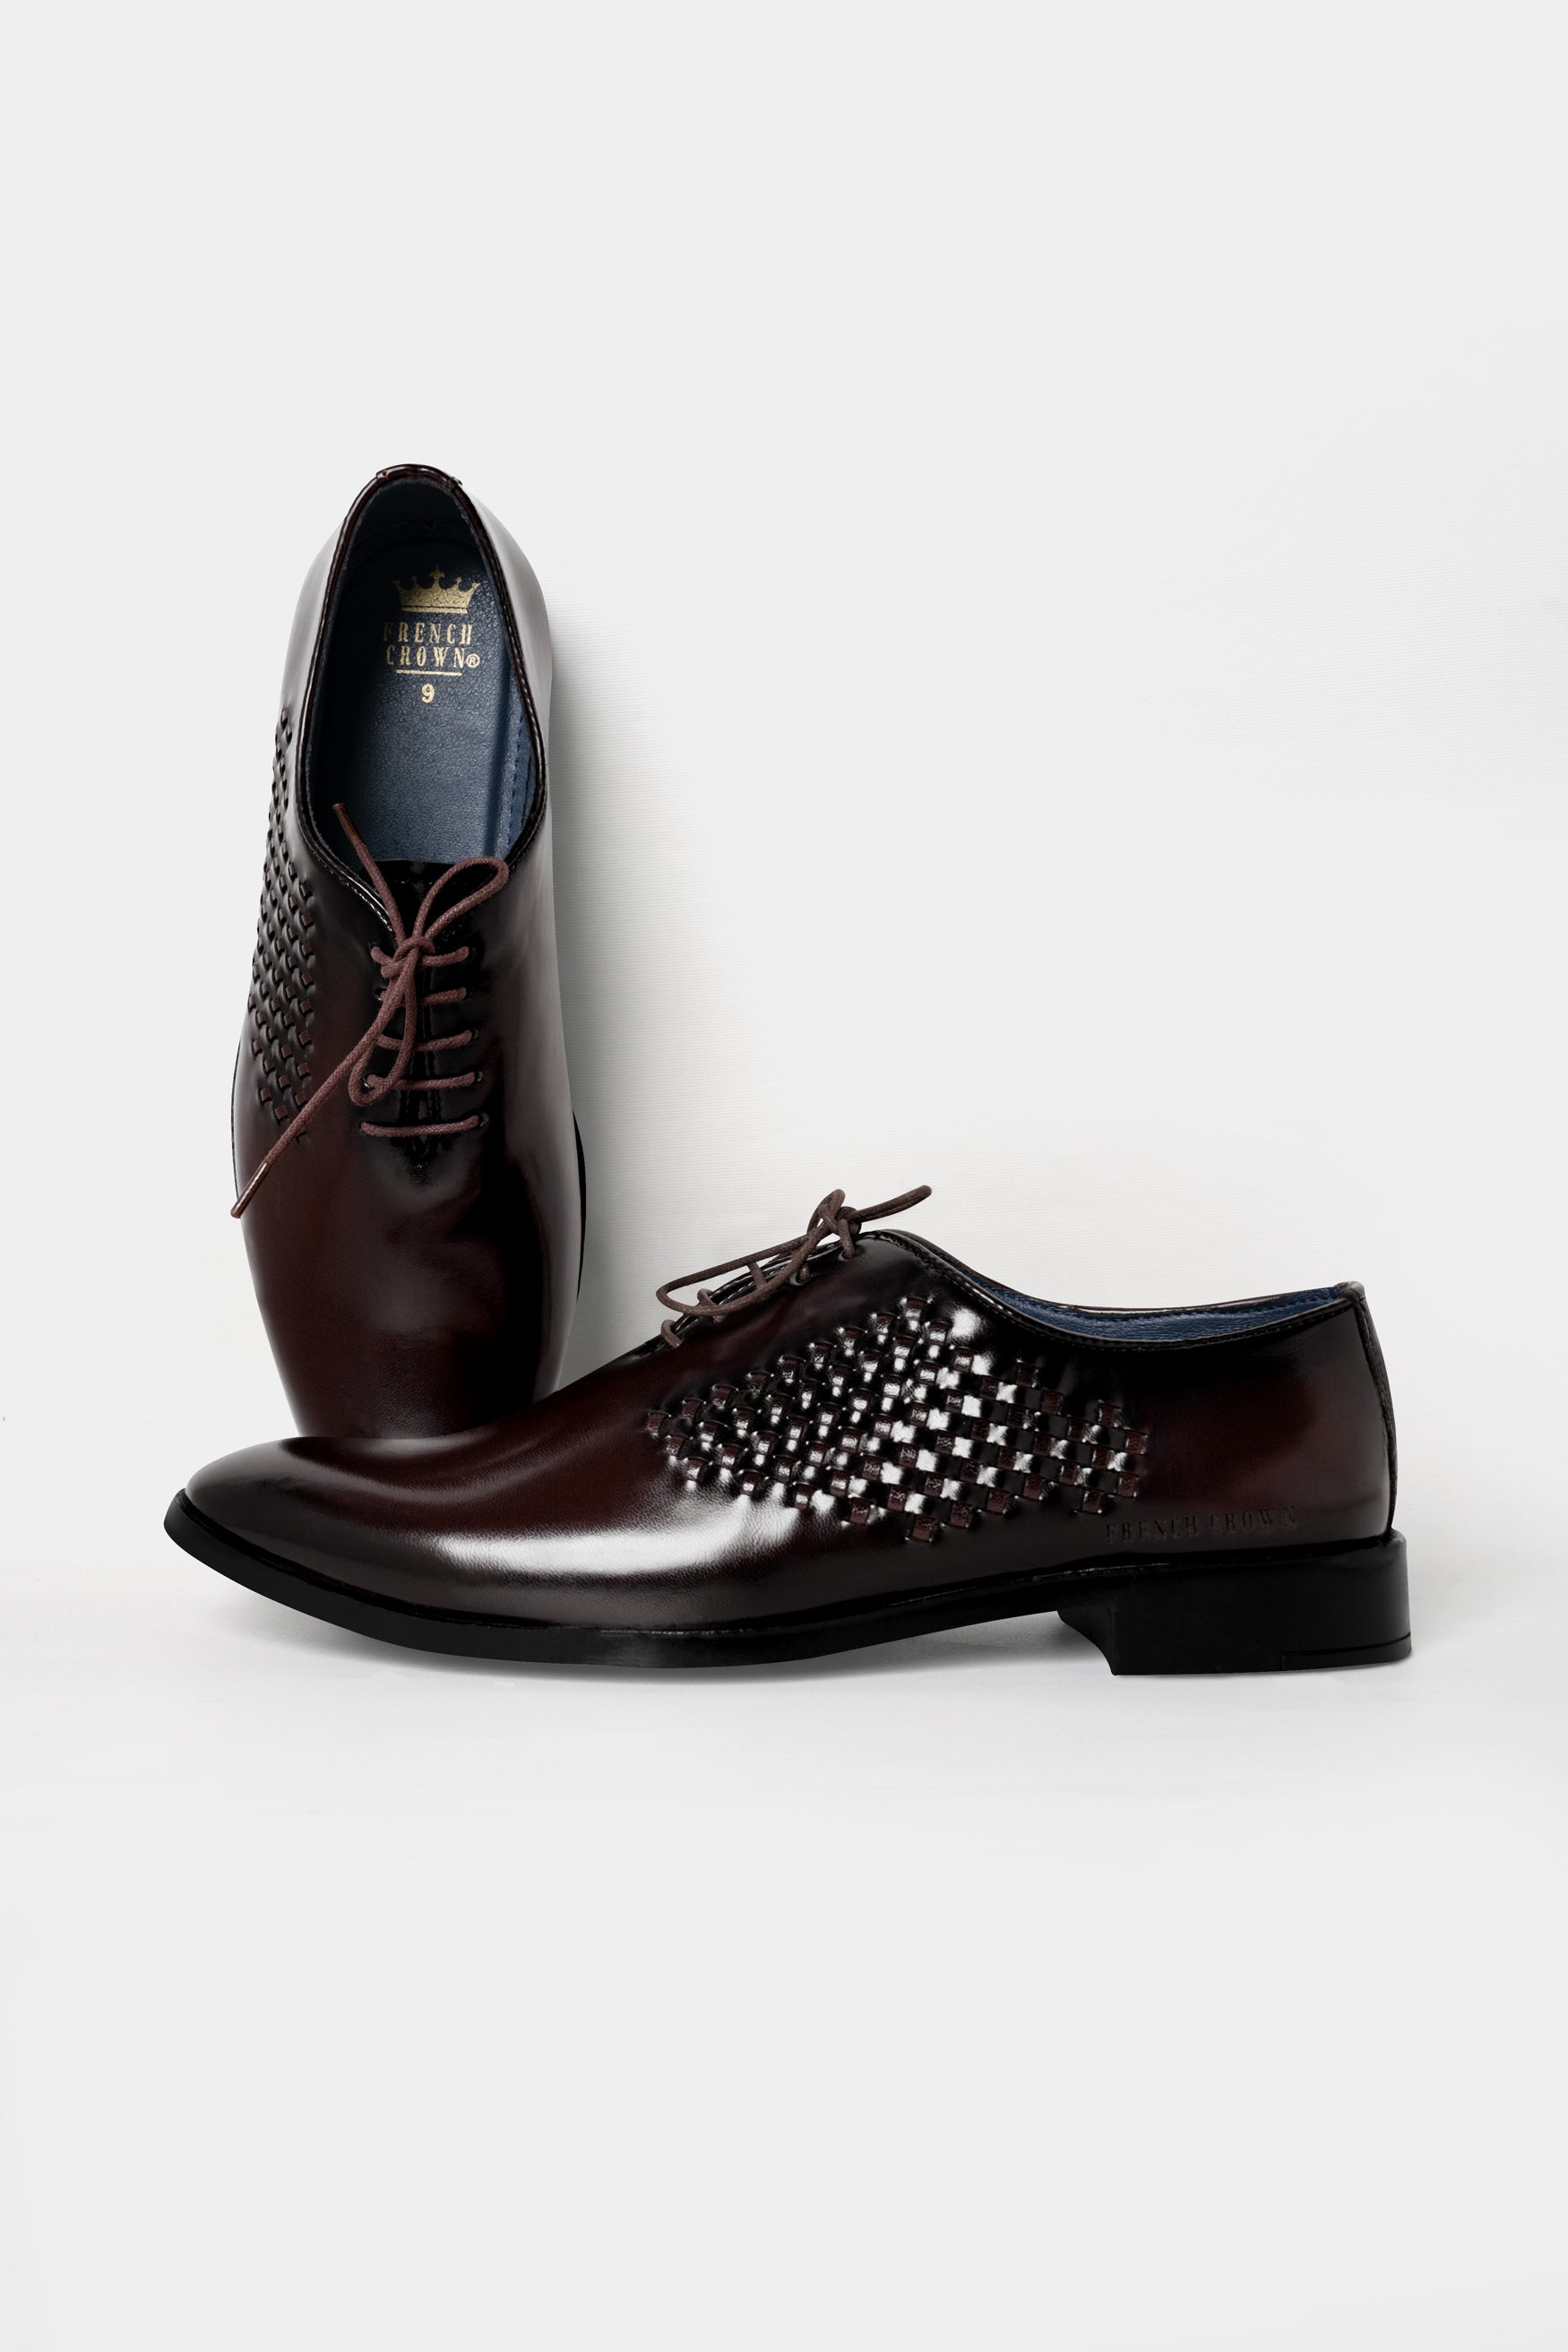 Eclipse Brown Embossed Weave Vegan Leather Oxford Shoes